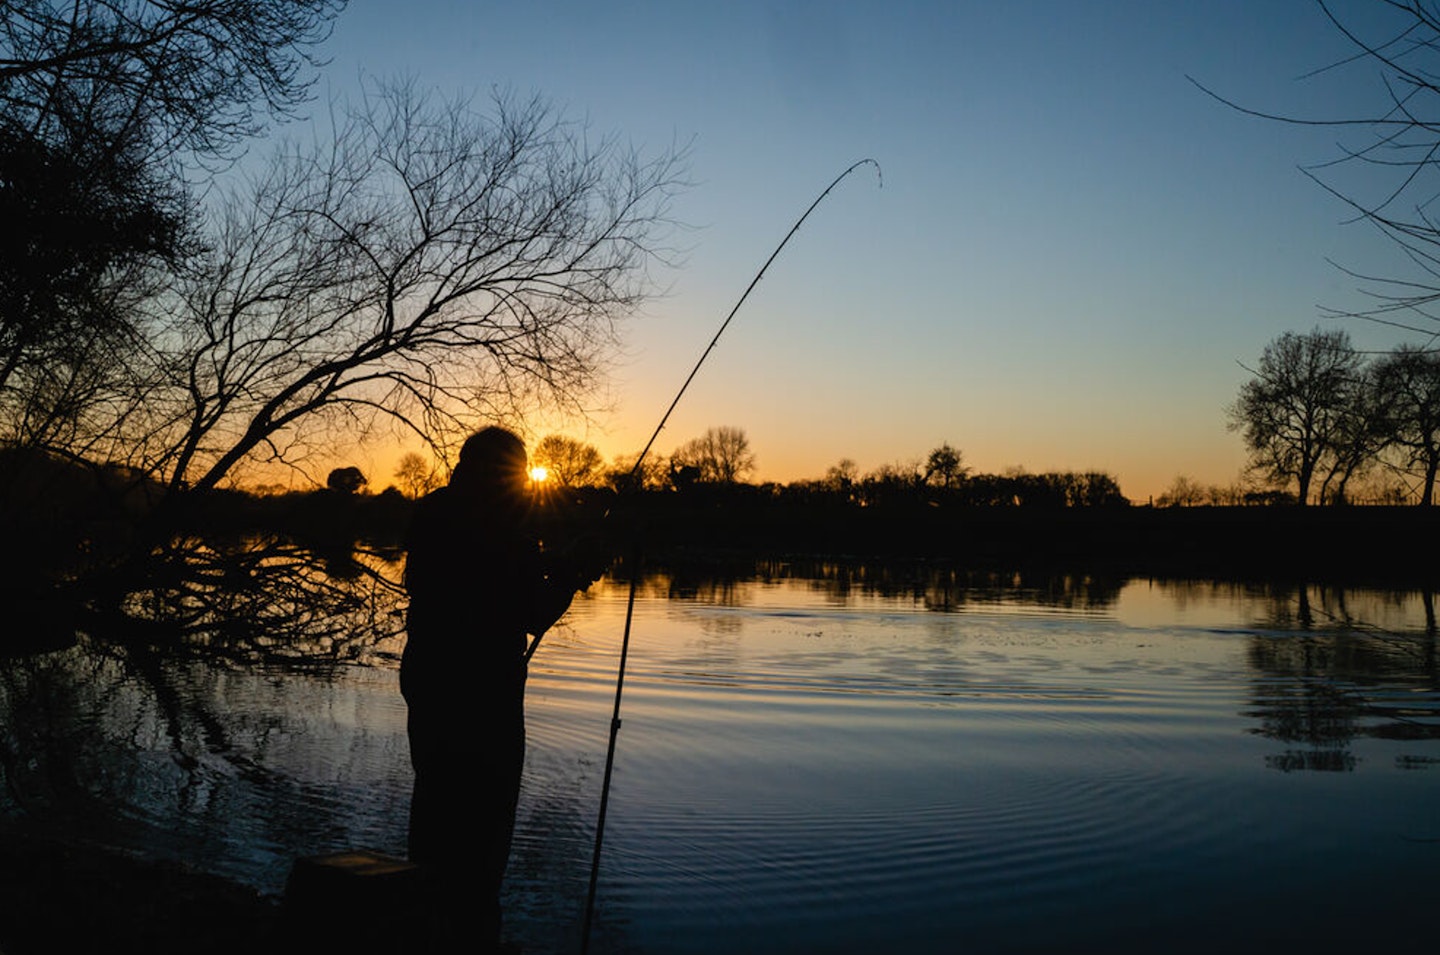 Fishing holes to cast your line in solitude